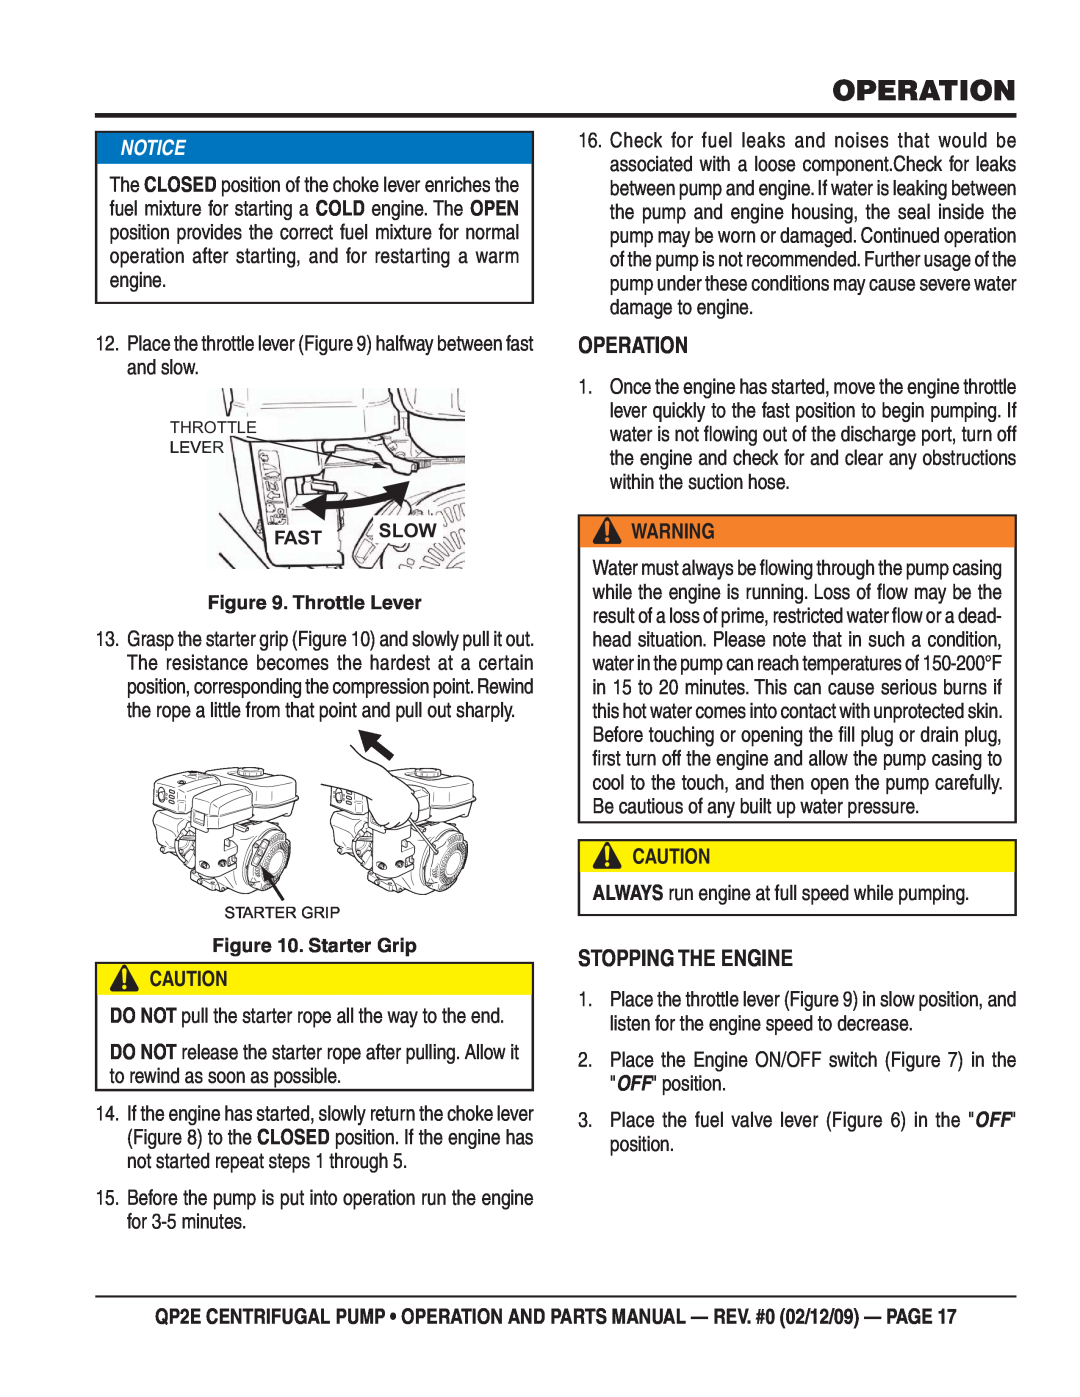 Multiquip QP2E manual Operation, Stopping The Engine, Notice 